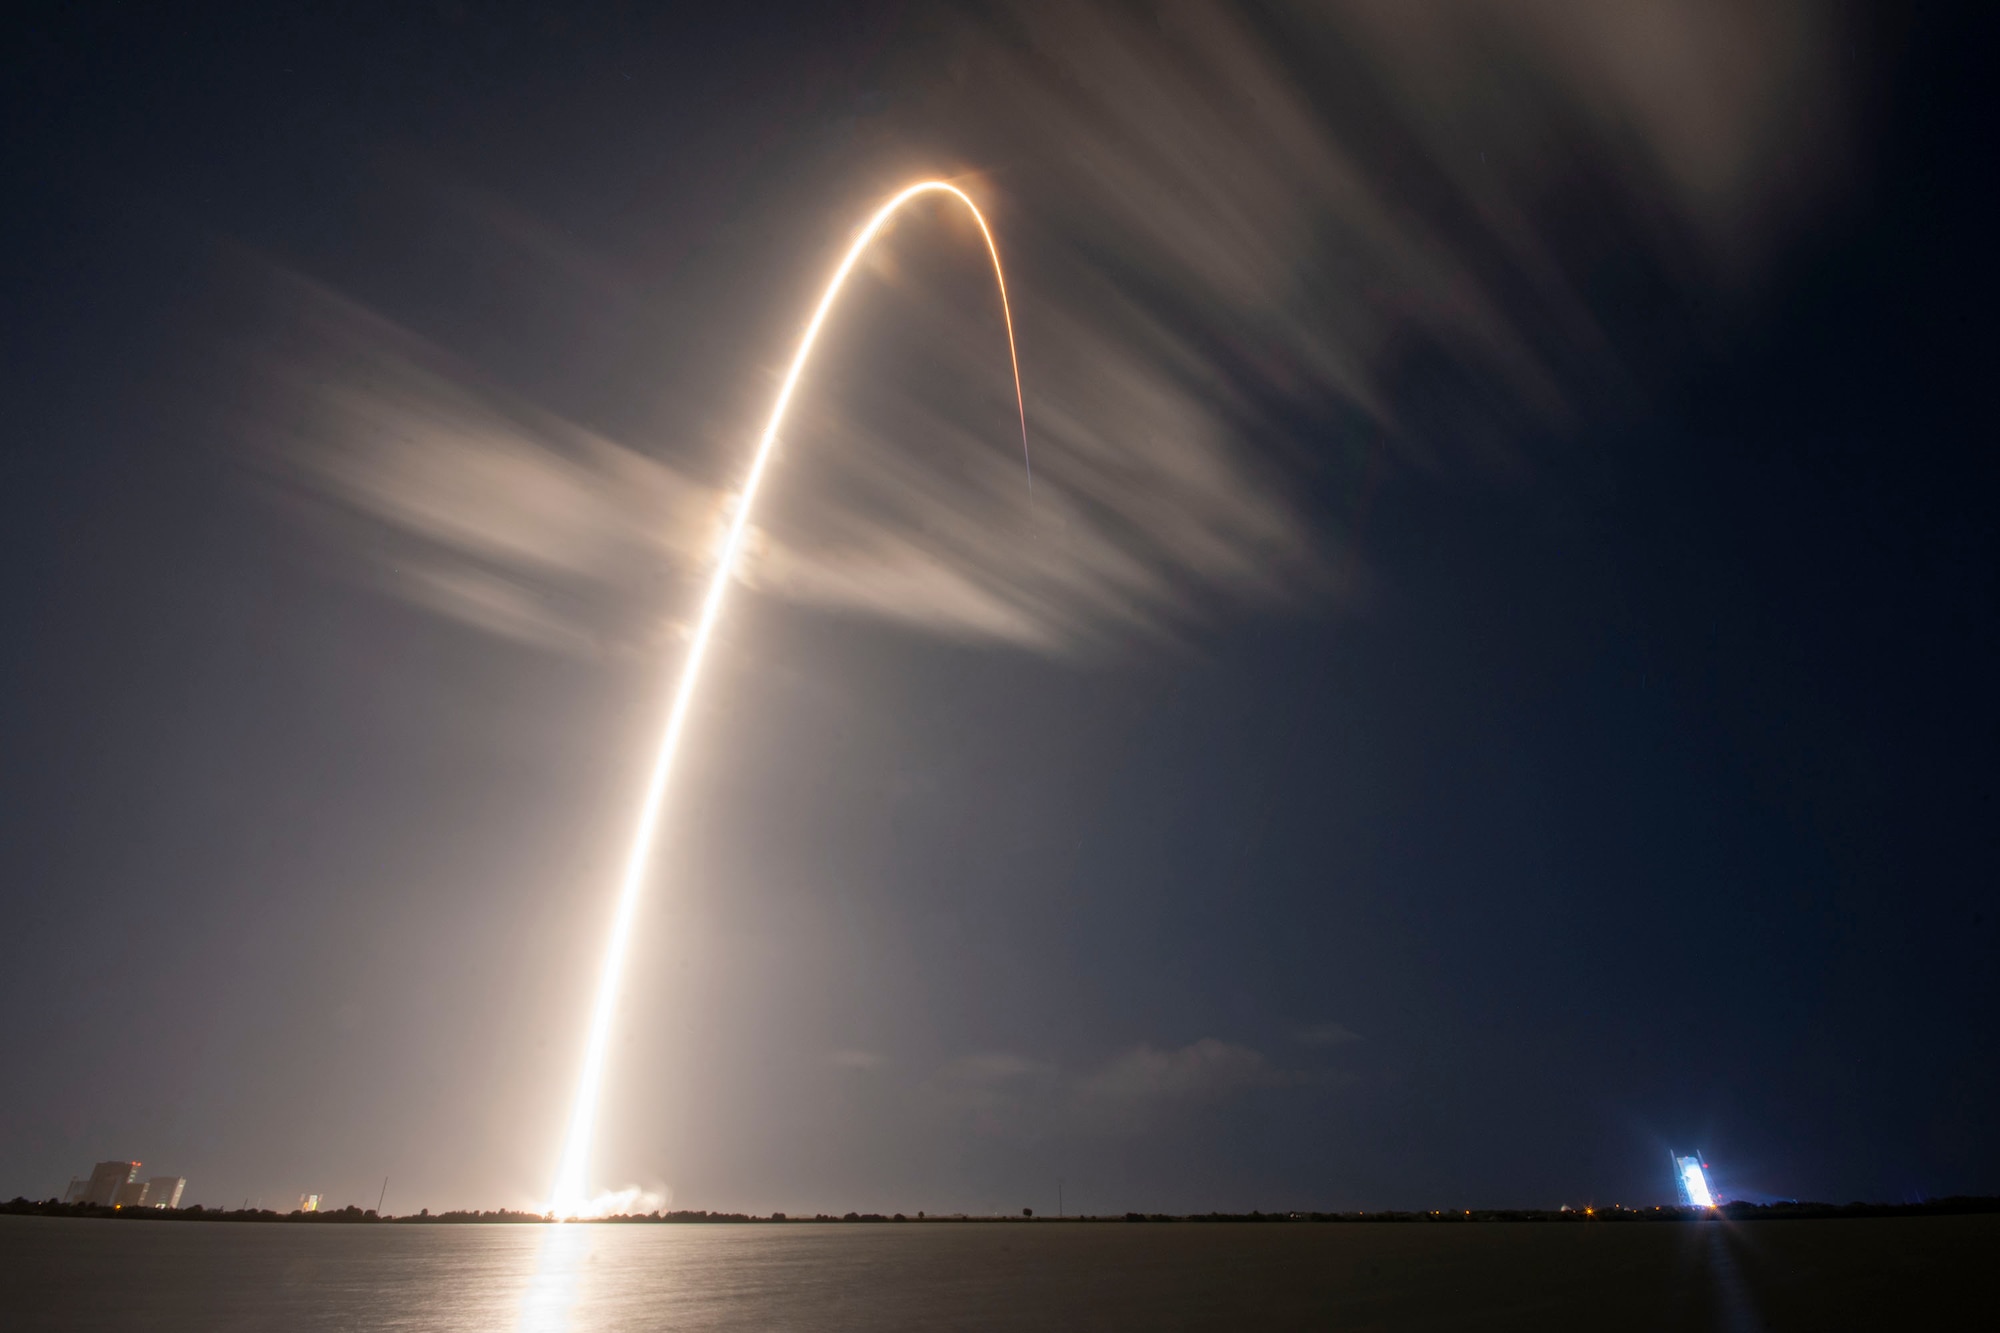 A Falcon 9 carrying GPS III SV04 lifts off from Cape Canaveral Air Force Station, Florida, Nov 5.  The fourth GPS III satellite, it will join the 31 operational satellites currently orbiting the Earth. GPS III brings new capabilities to users, including three times greater accuracy and up to eight times improved anti-jamming capabilities. (Photo courtesy of SpaceX)